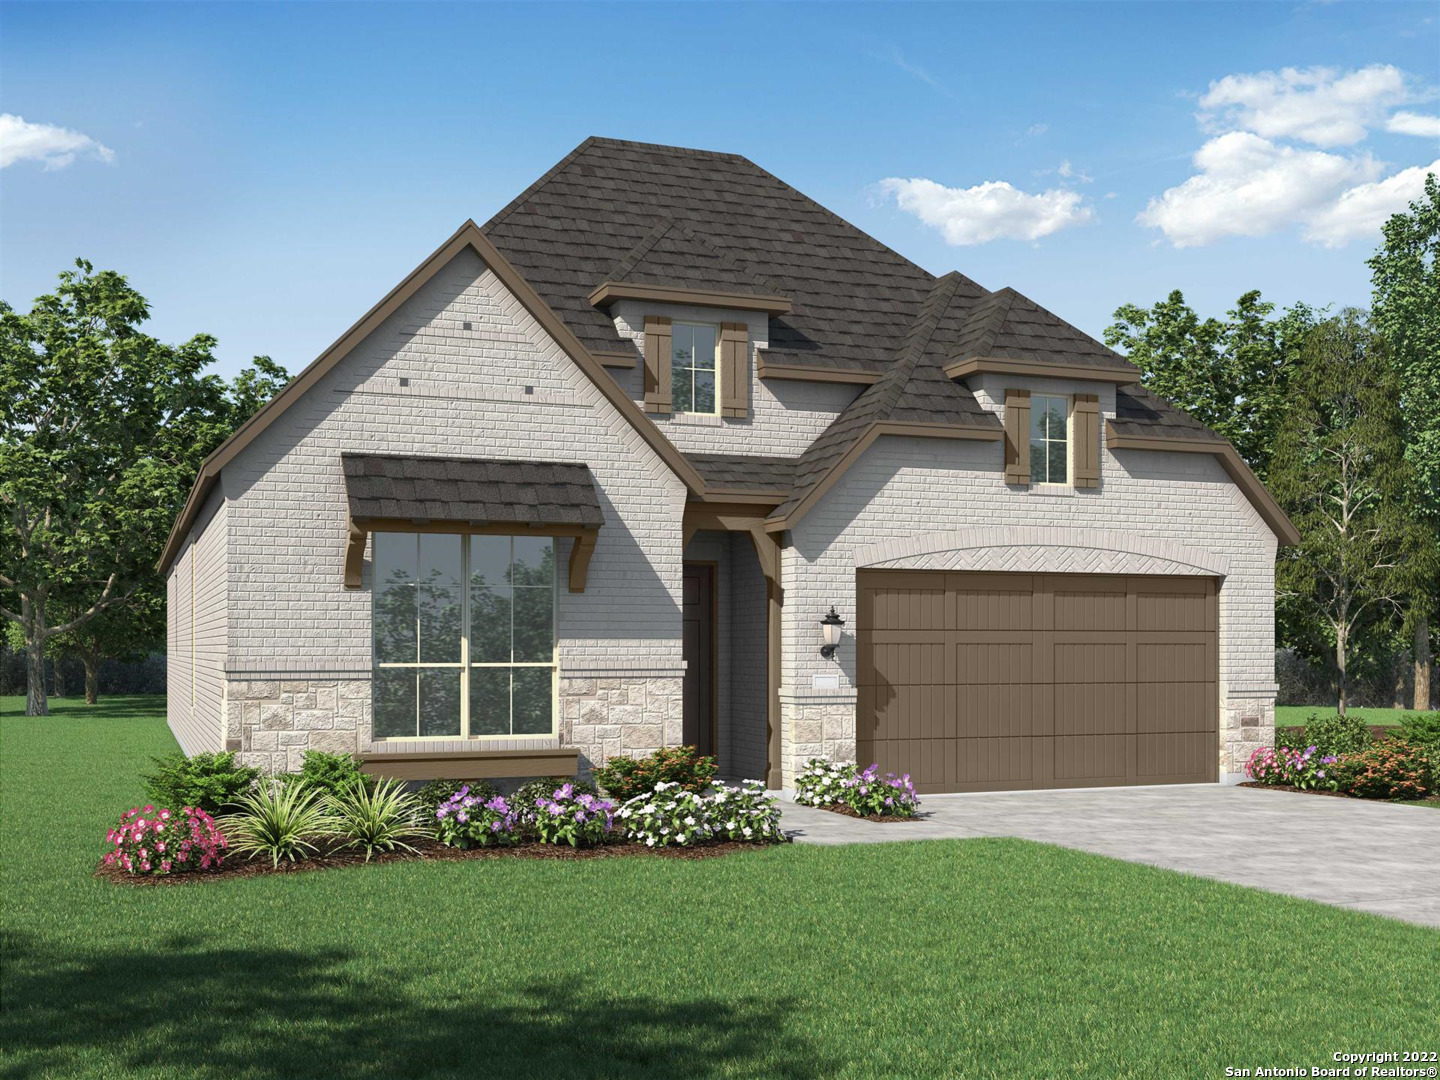 MLS# 1623678 - Built by Highland Homes - March completion! ~ Denton Plan. Single story home located near green-belt and walking trails. Entertainment room. Freestanding tub at Master bath. Extended outdoor back patio!